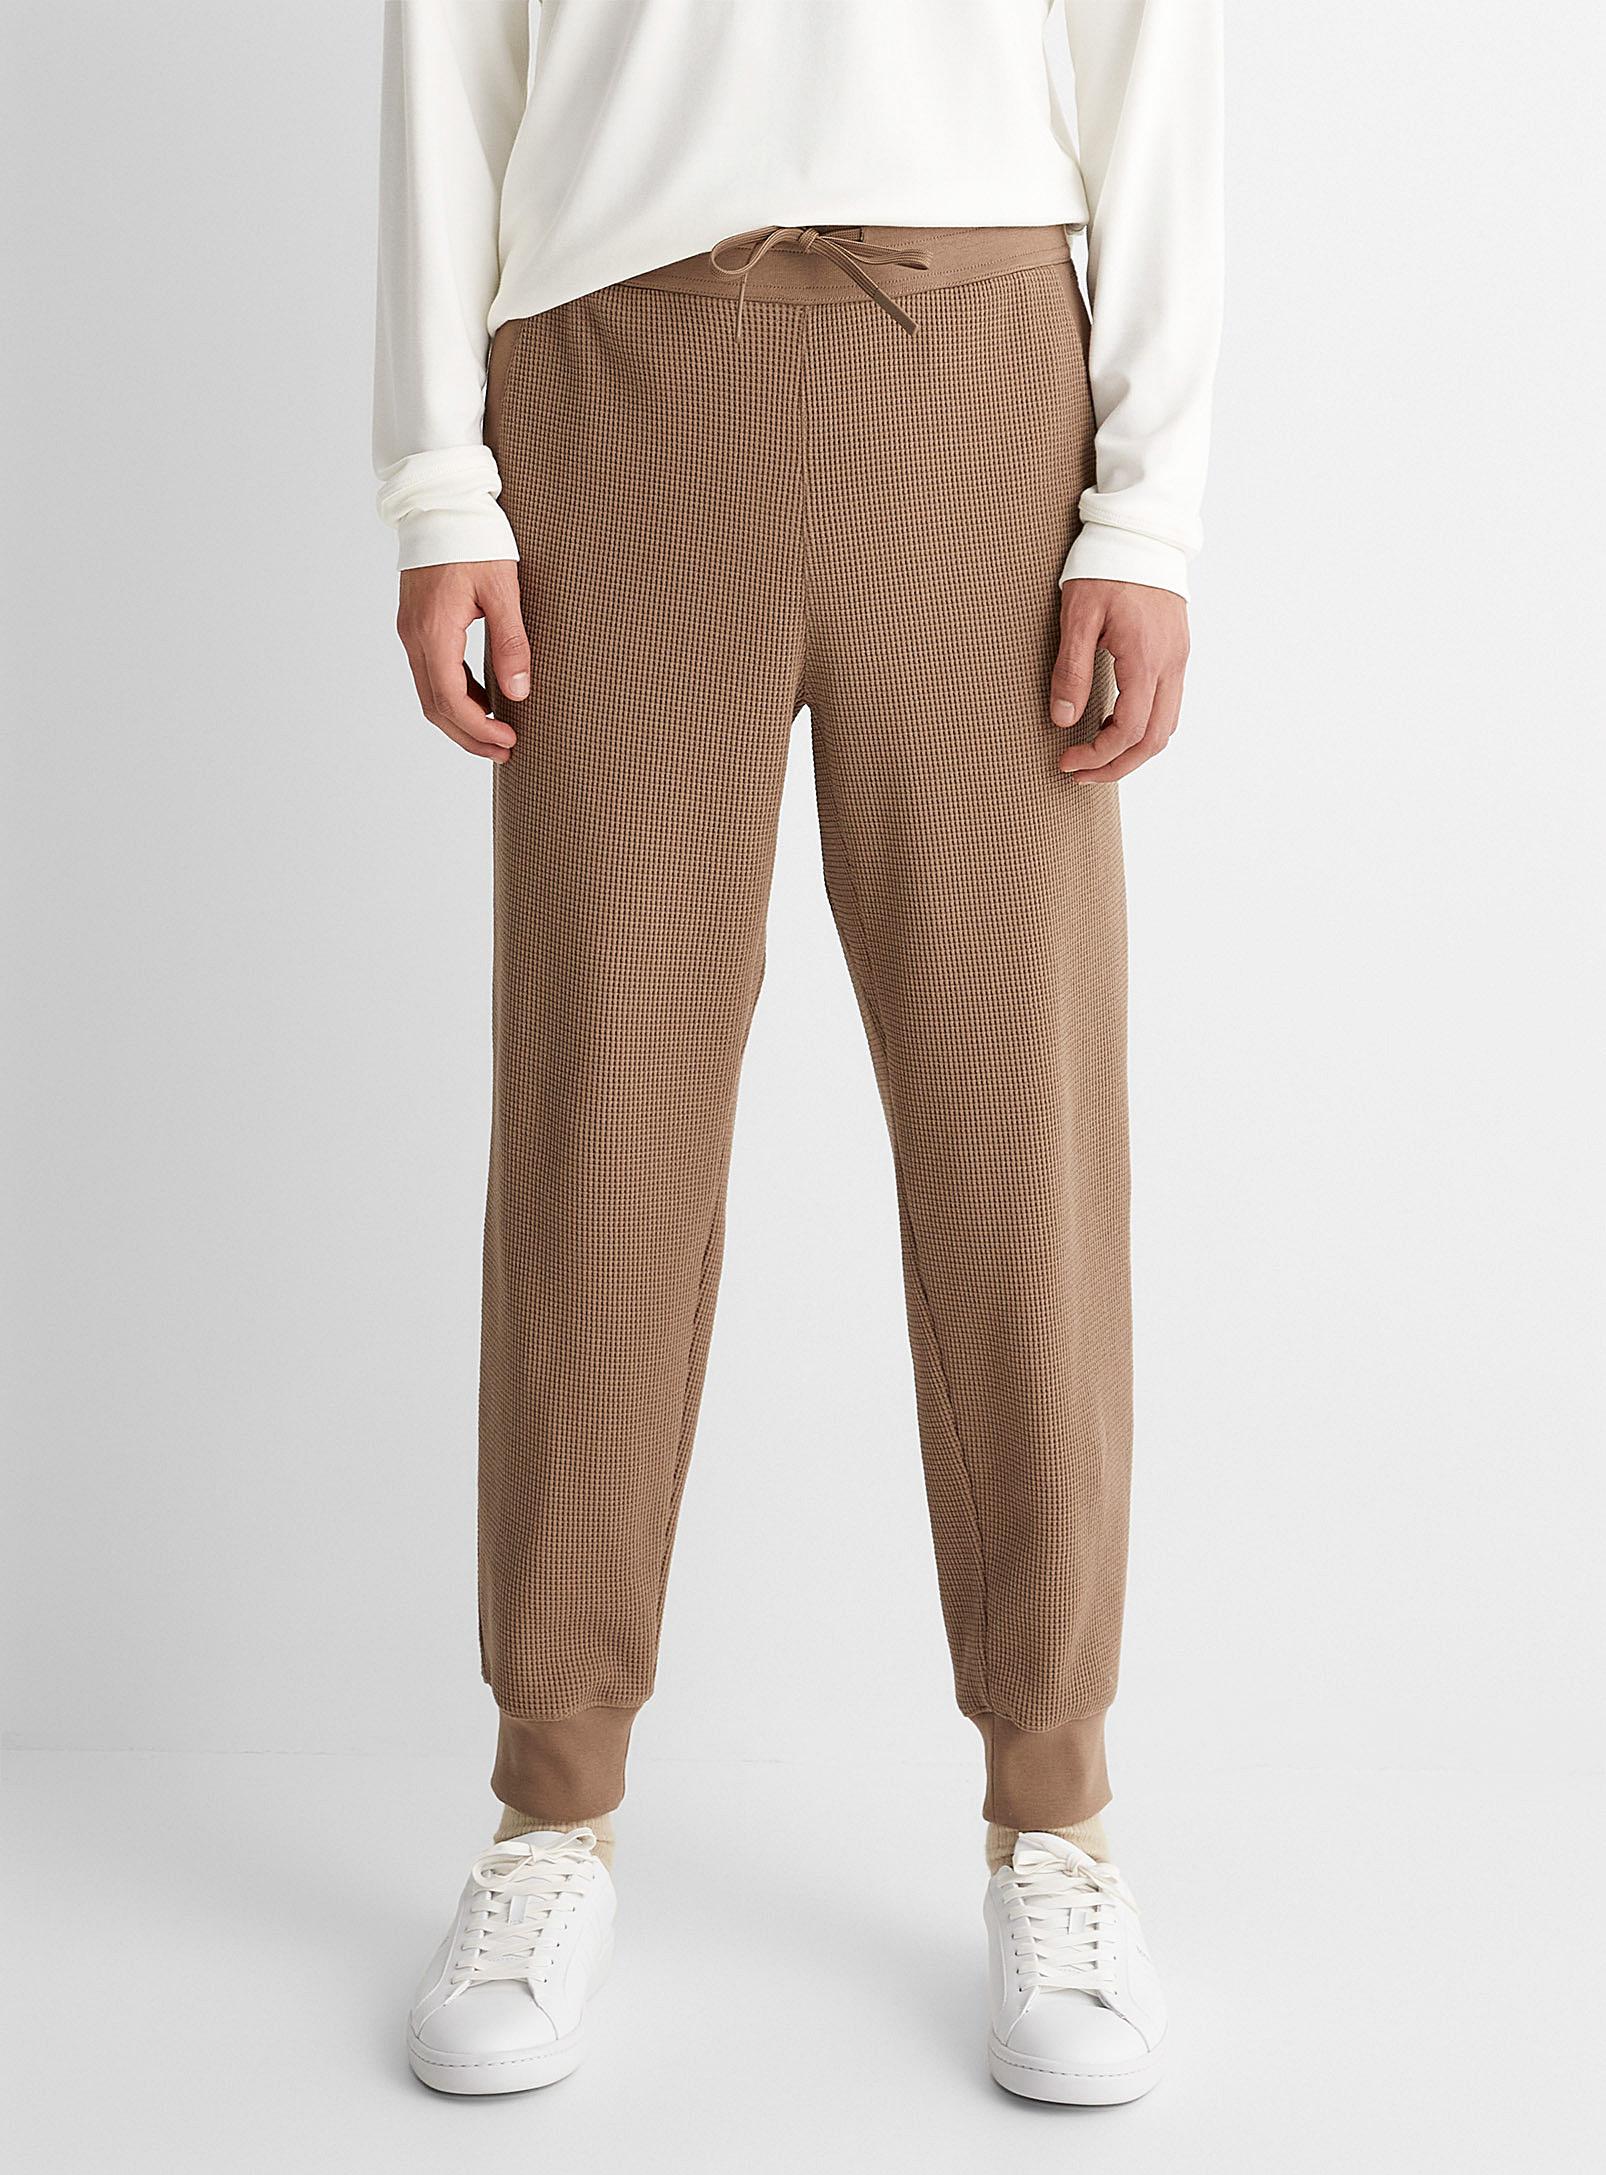 Theory Balena Waffle Knit joggers in Natural for Men